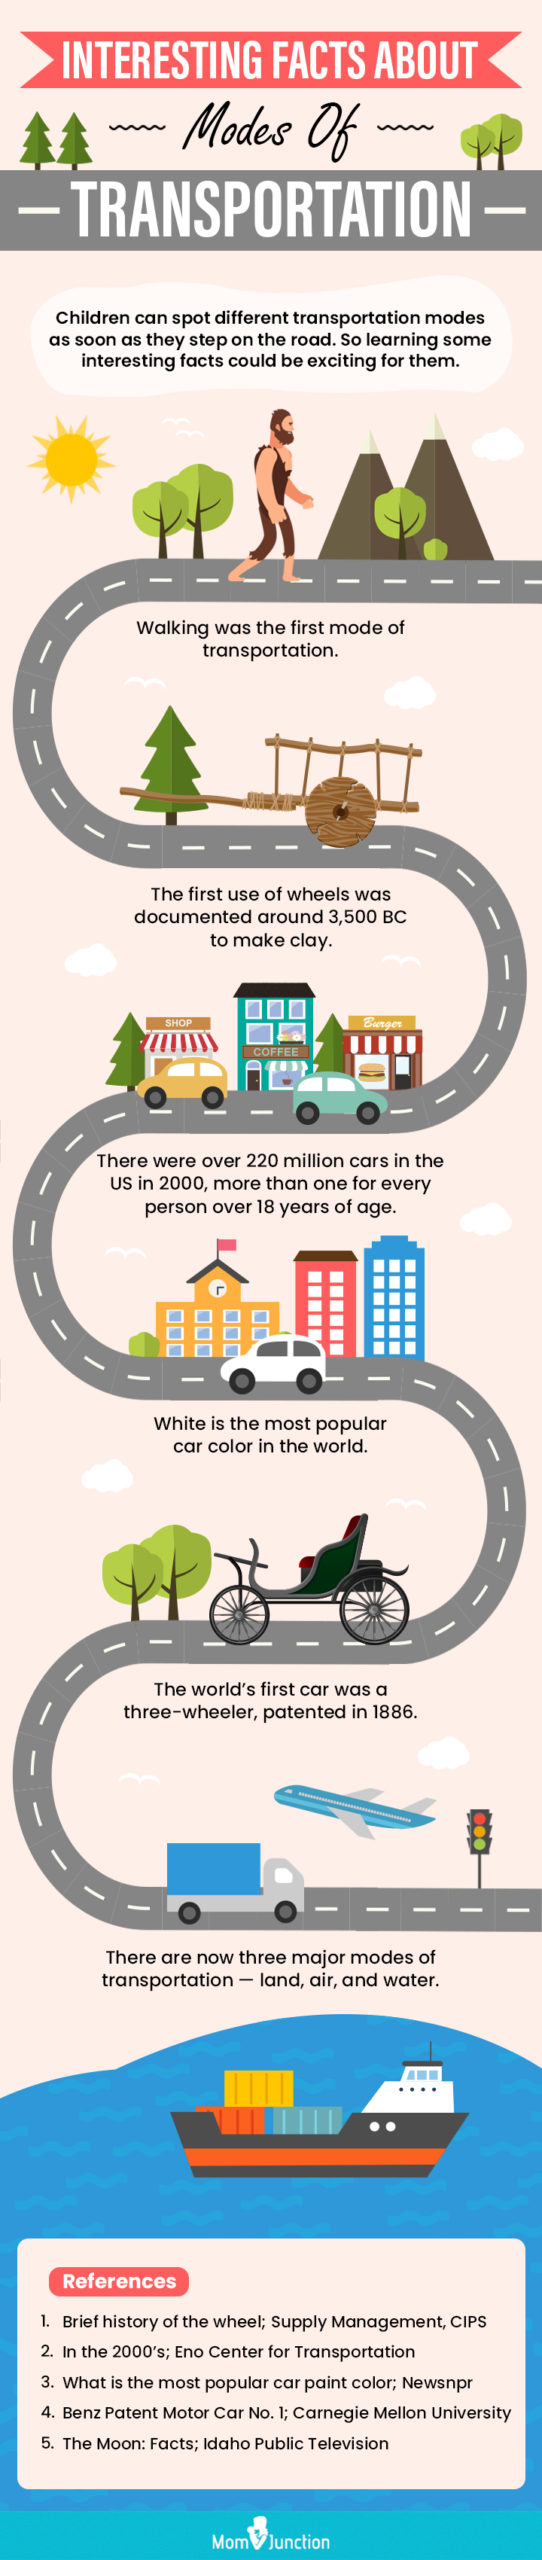 interesting facts about modes of transportation [infographic]